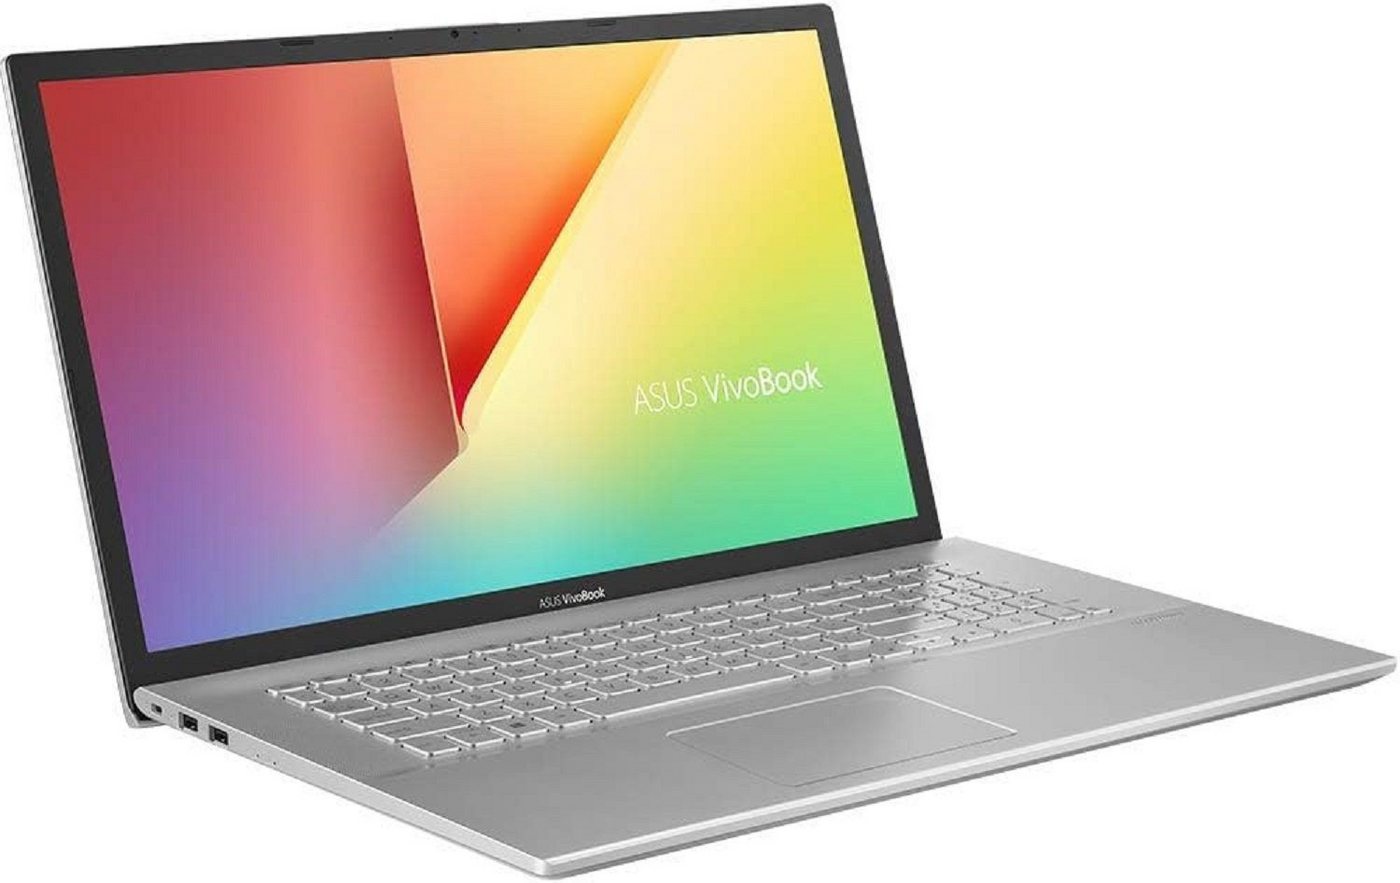 Asus Vivobook 17 Laptop 17,3 Full-HD Display Intel Core i7-1065G7 16GB RAM Notebook (40,60 cm/17.3 Zoll, Intel Core i7, Laptop Computer Notebook 17 Zoll PC Business PC ASUS 512GB SSD)" von Asus